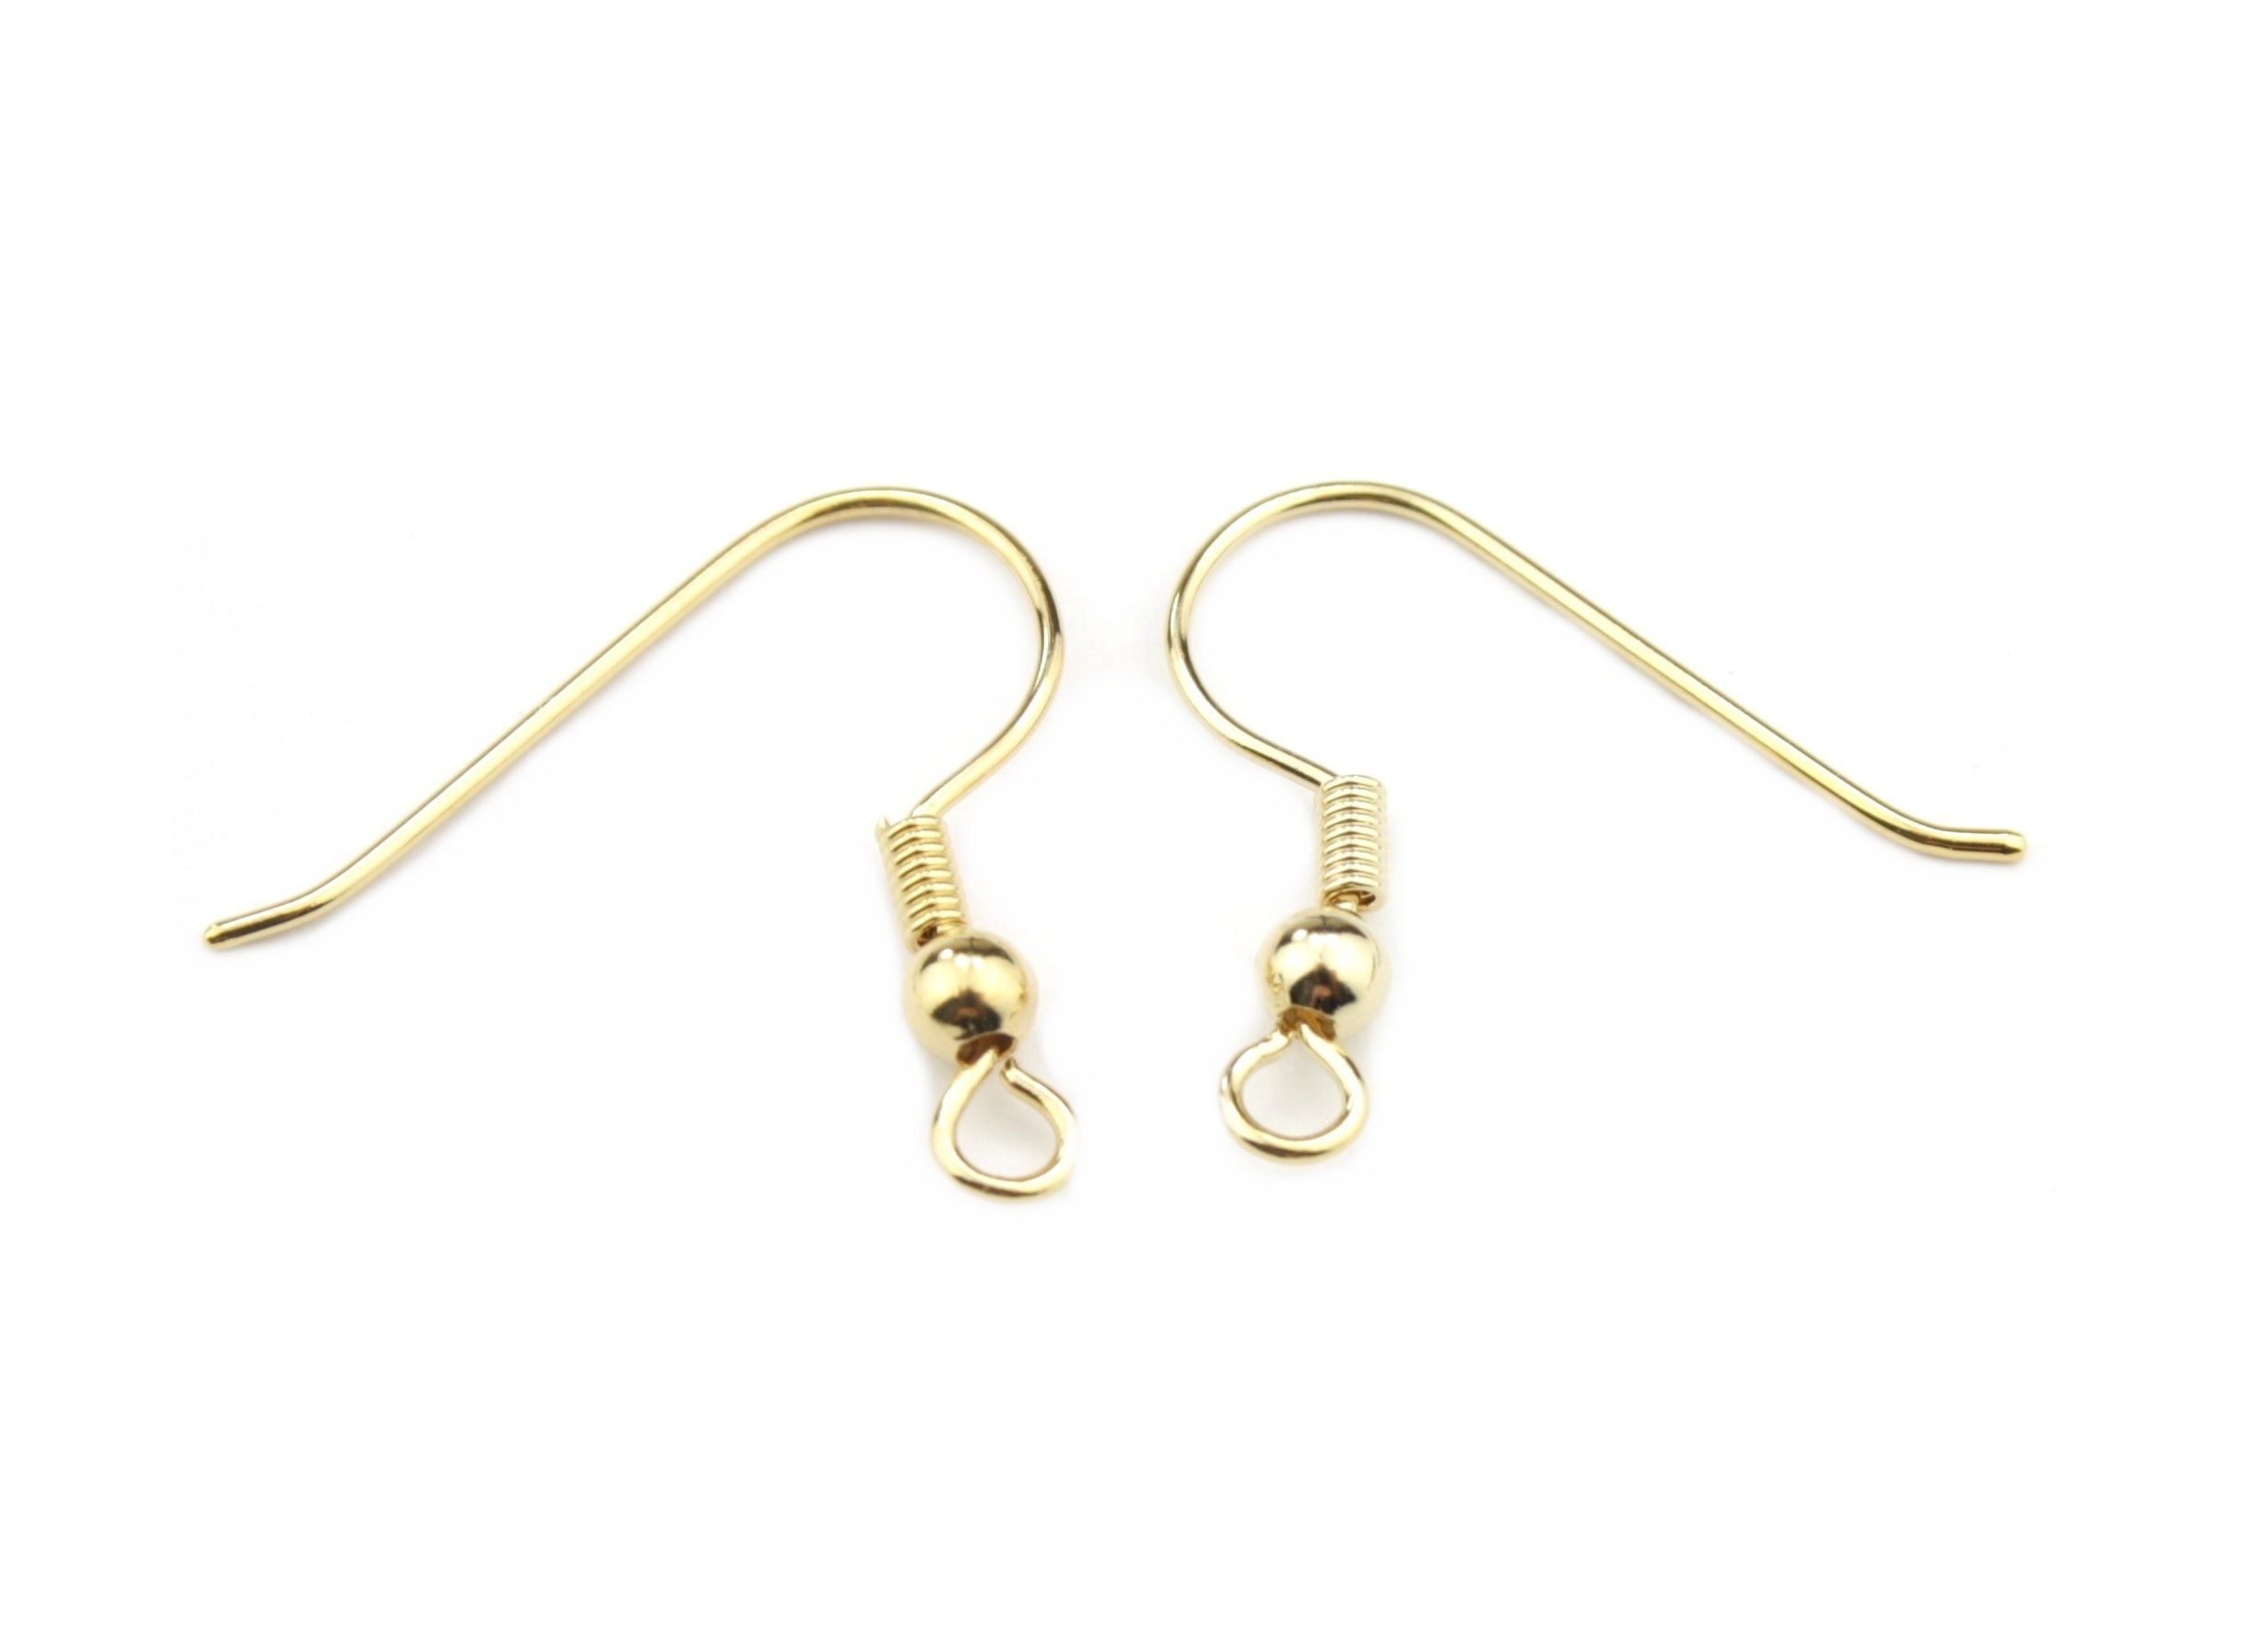 18K Gold Plated Flattened French Earrings hooks - luxury quality